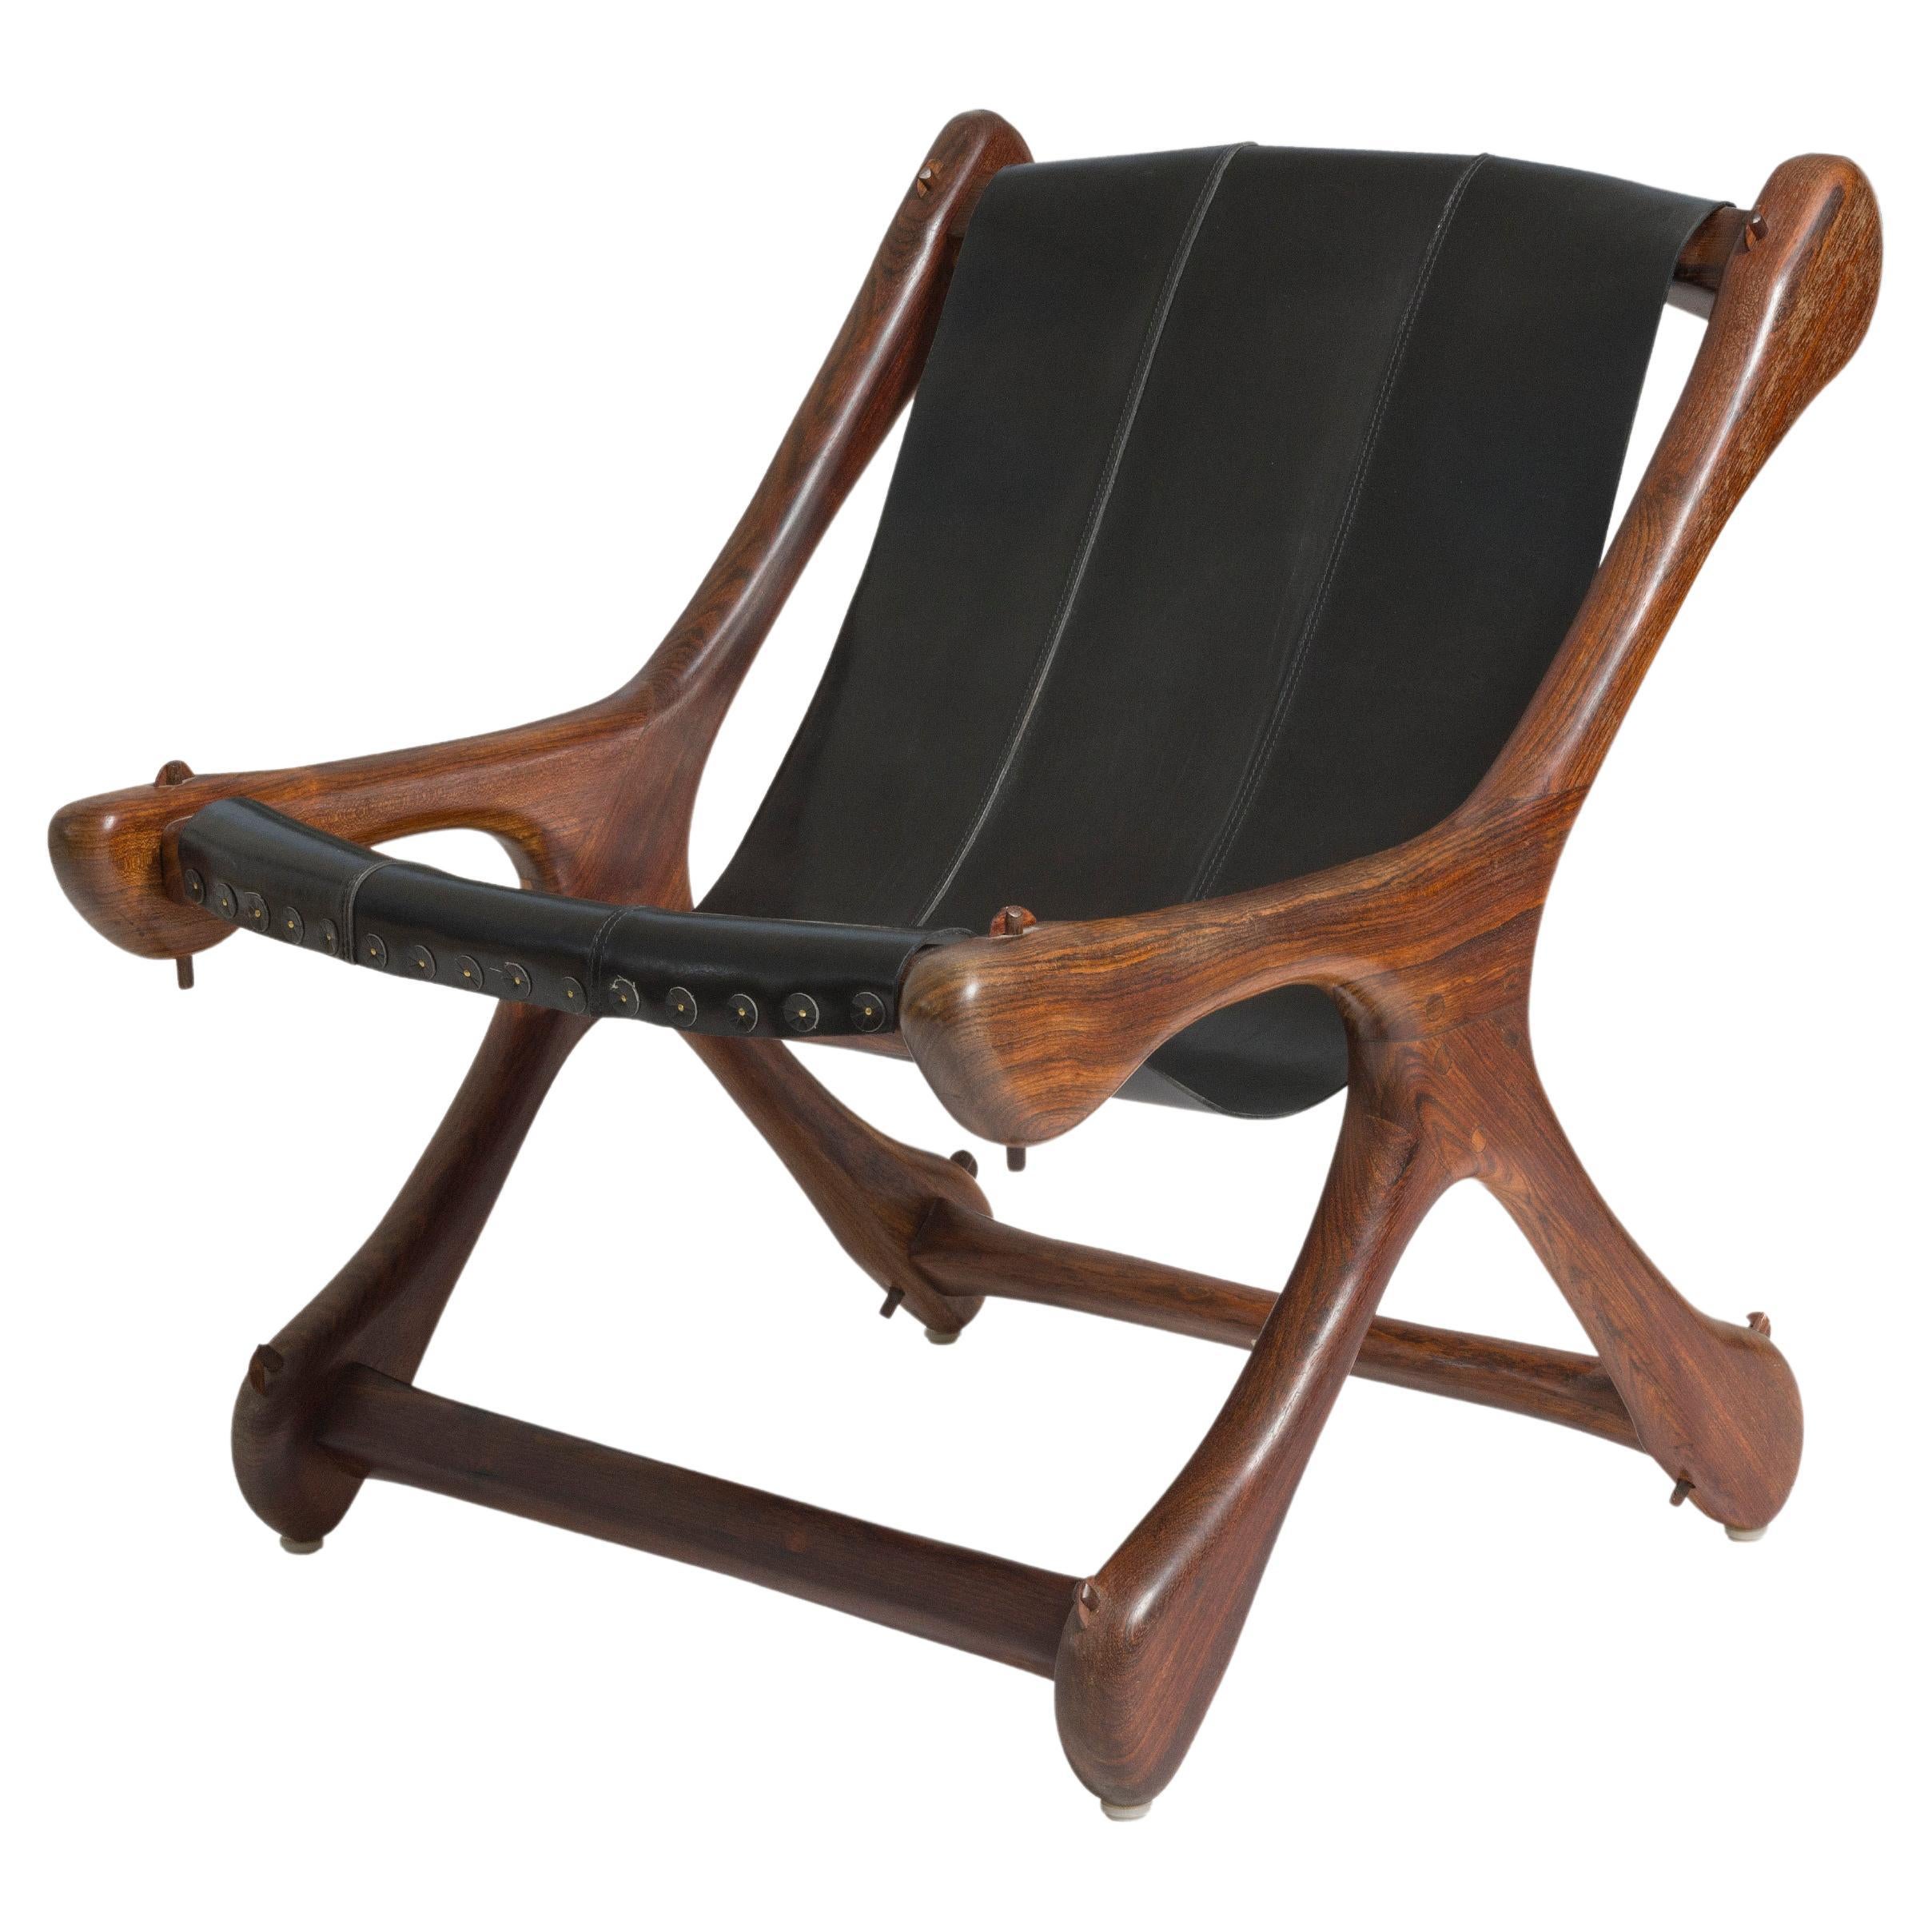 Mexican Modern Lounge Chair, Wood and Leather, 1960's